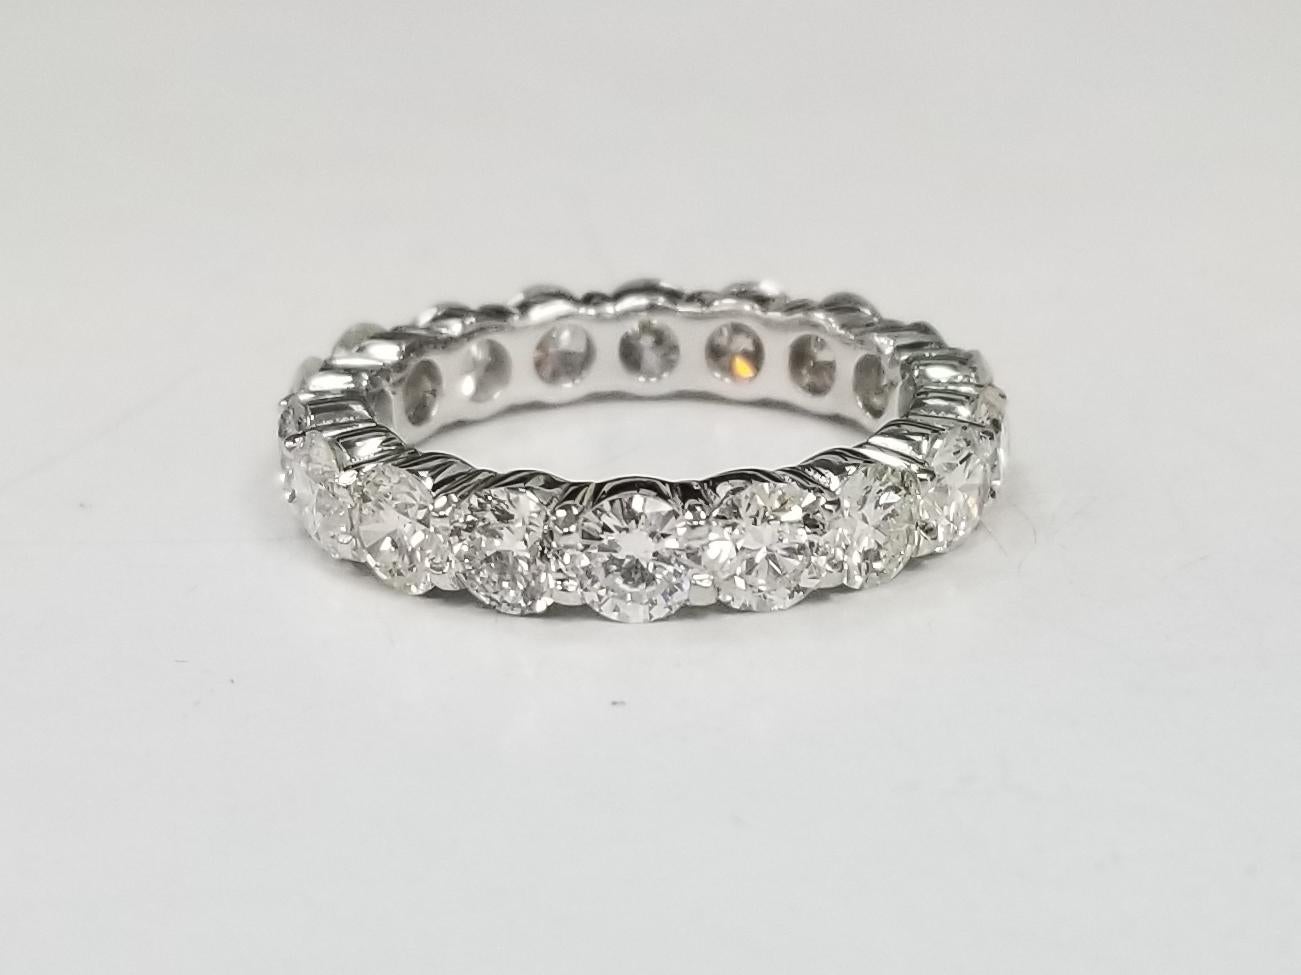 Women's or Men's 14k White Gold 4.25 Carats Diamond Eternity Ring Set with Shared Prongs For Sale